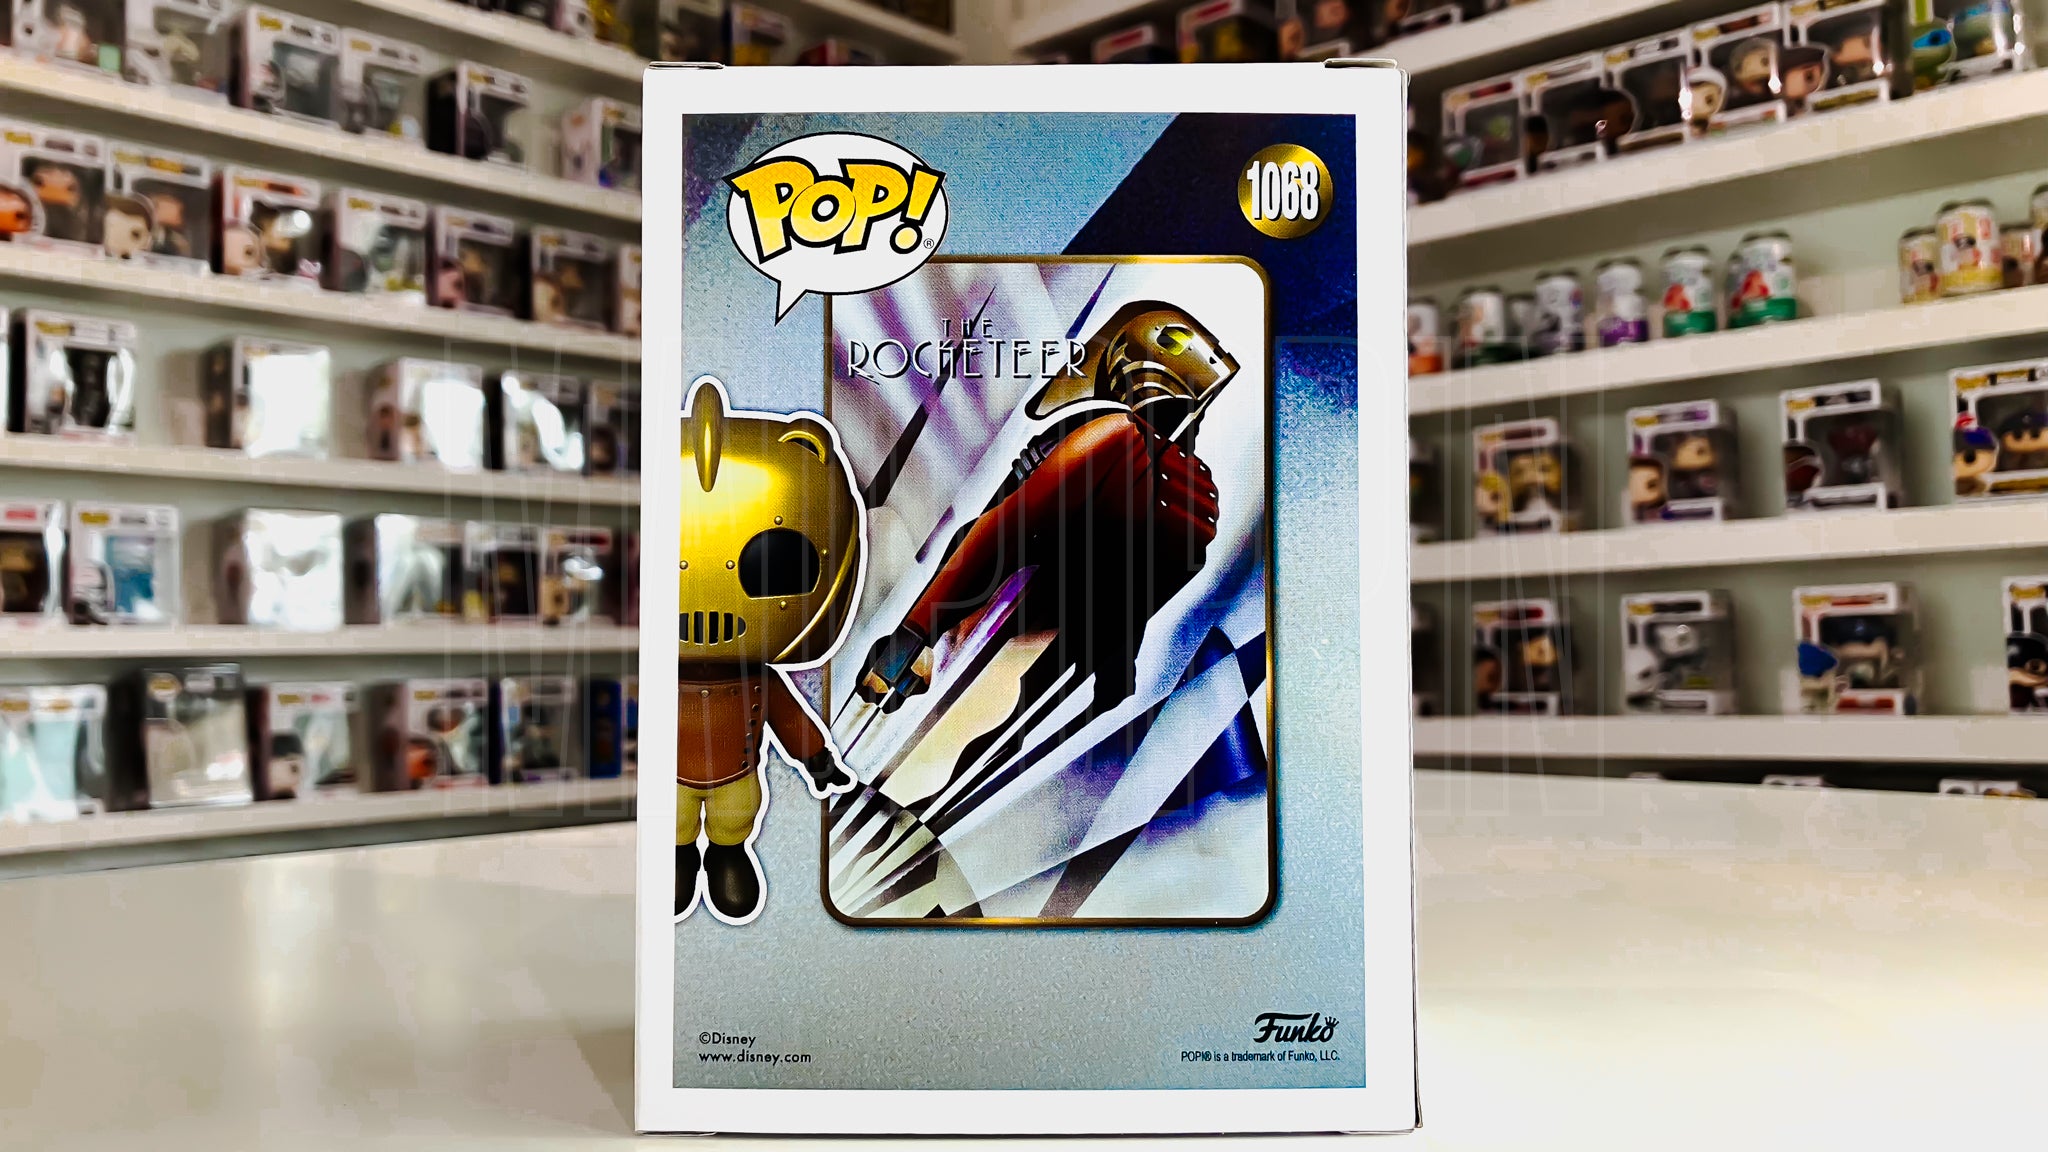 Funko Pop The Rocketeer Flying Summer Convention Limited Edition 1068